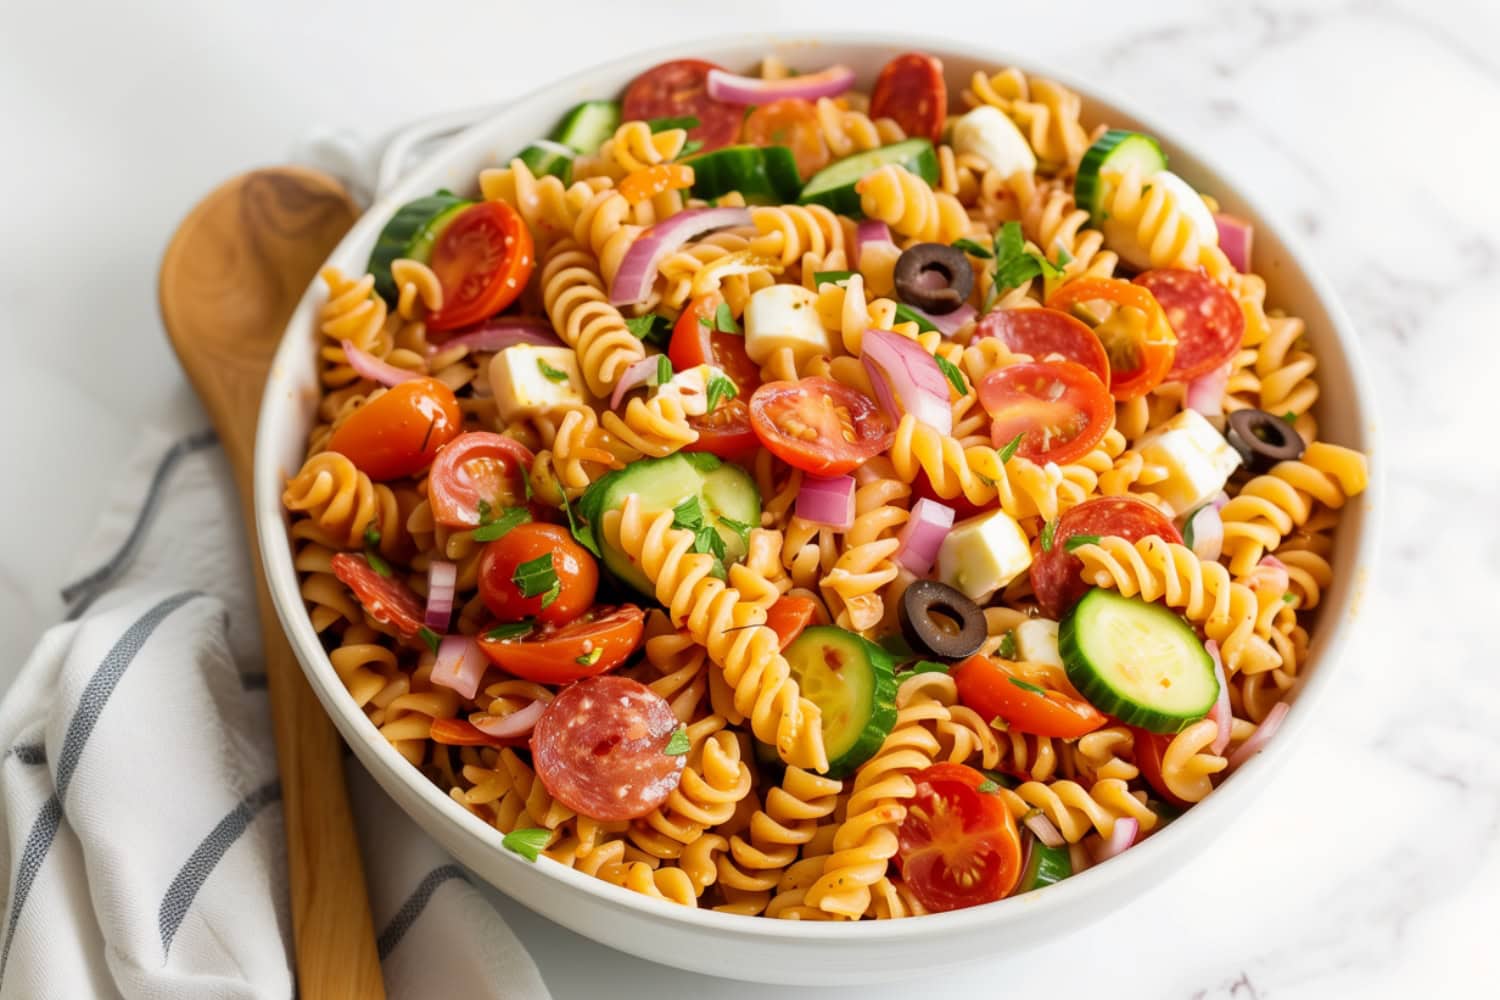 Delicious supreme pasta salad featuring rotini, cucumbers, and red onions.